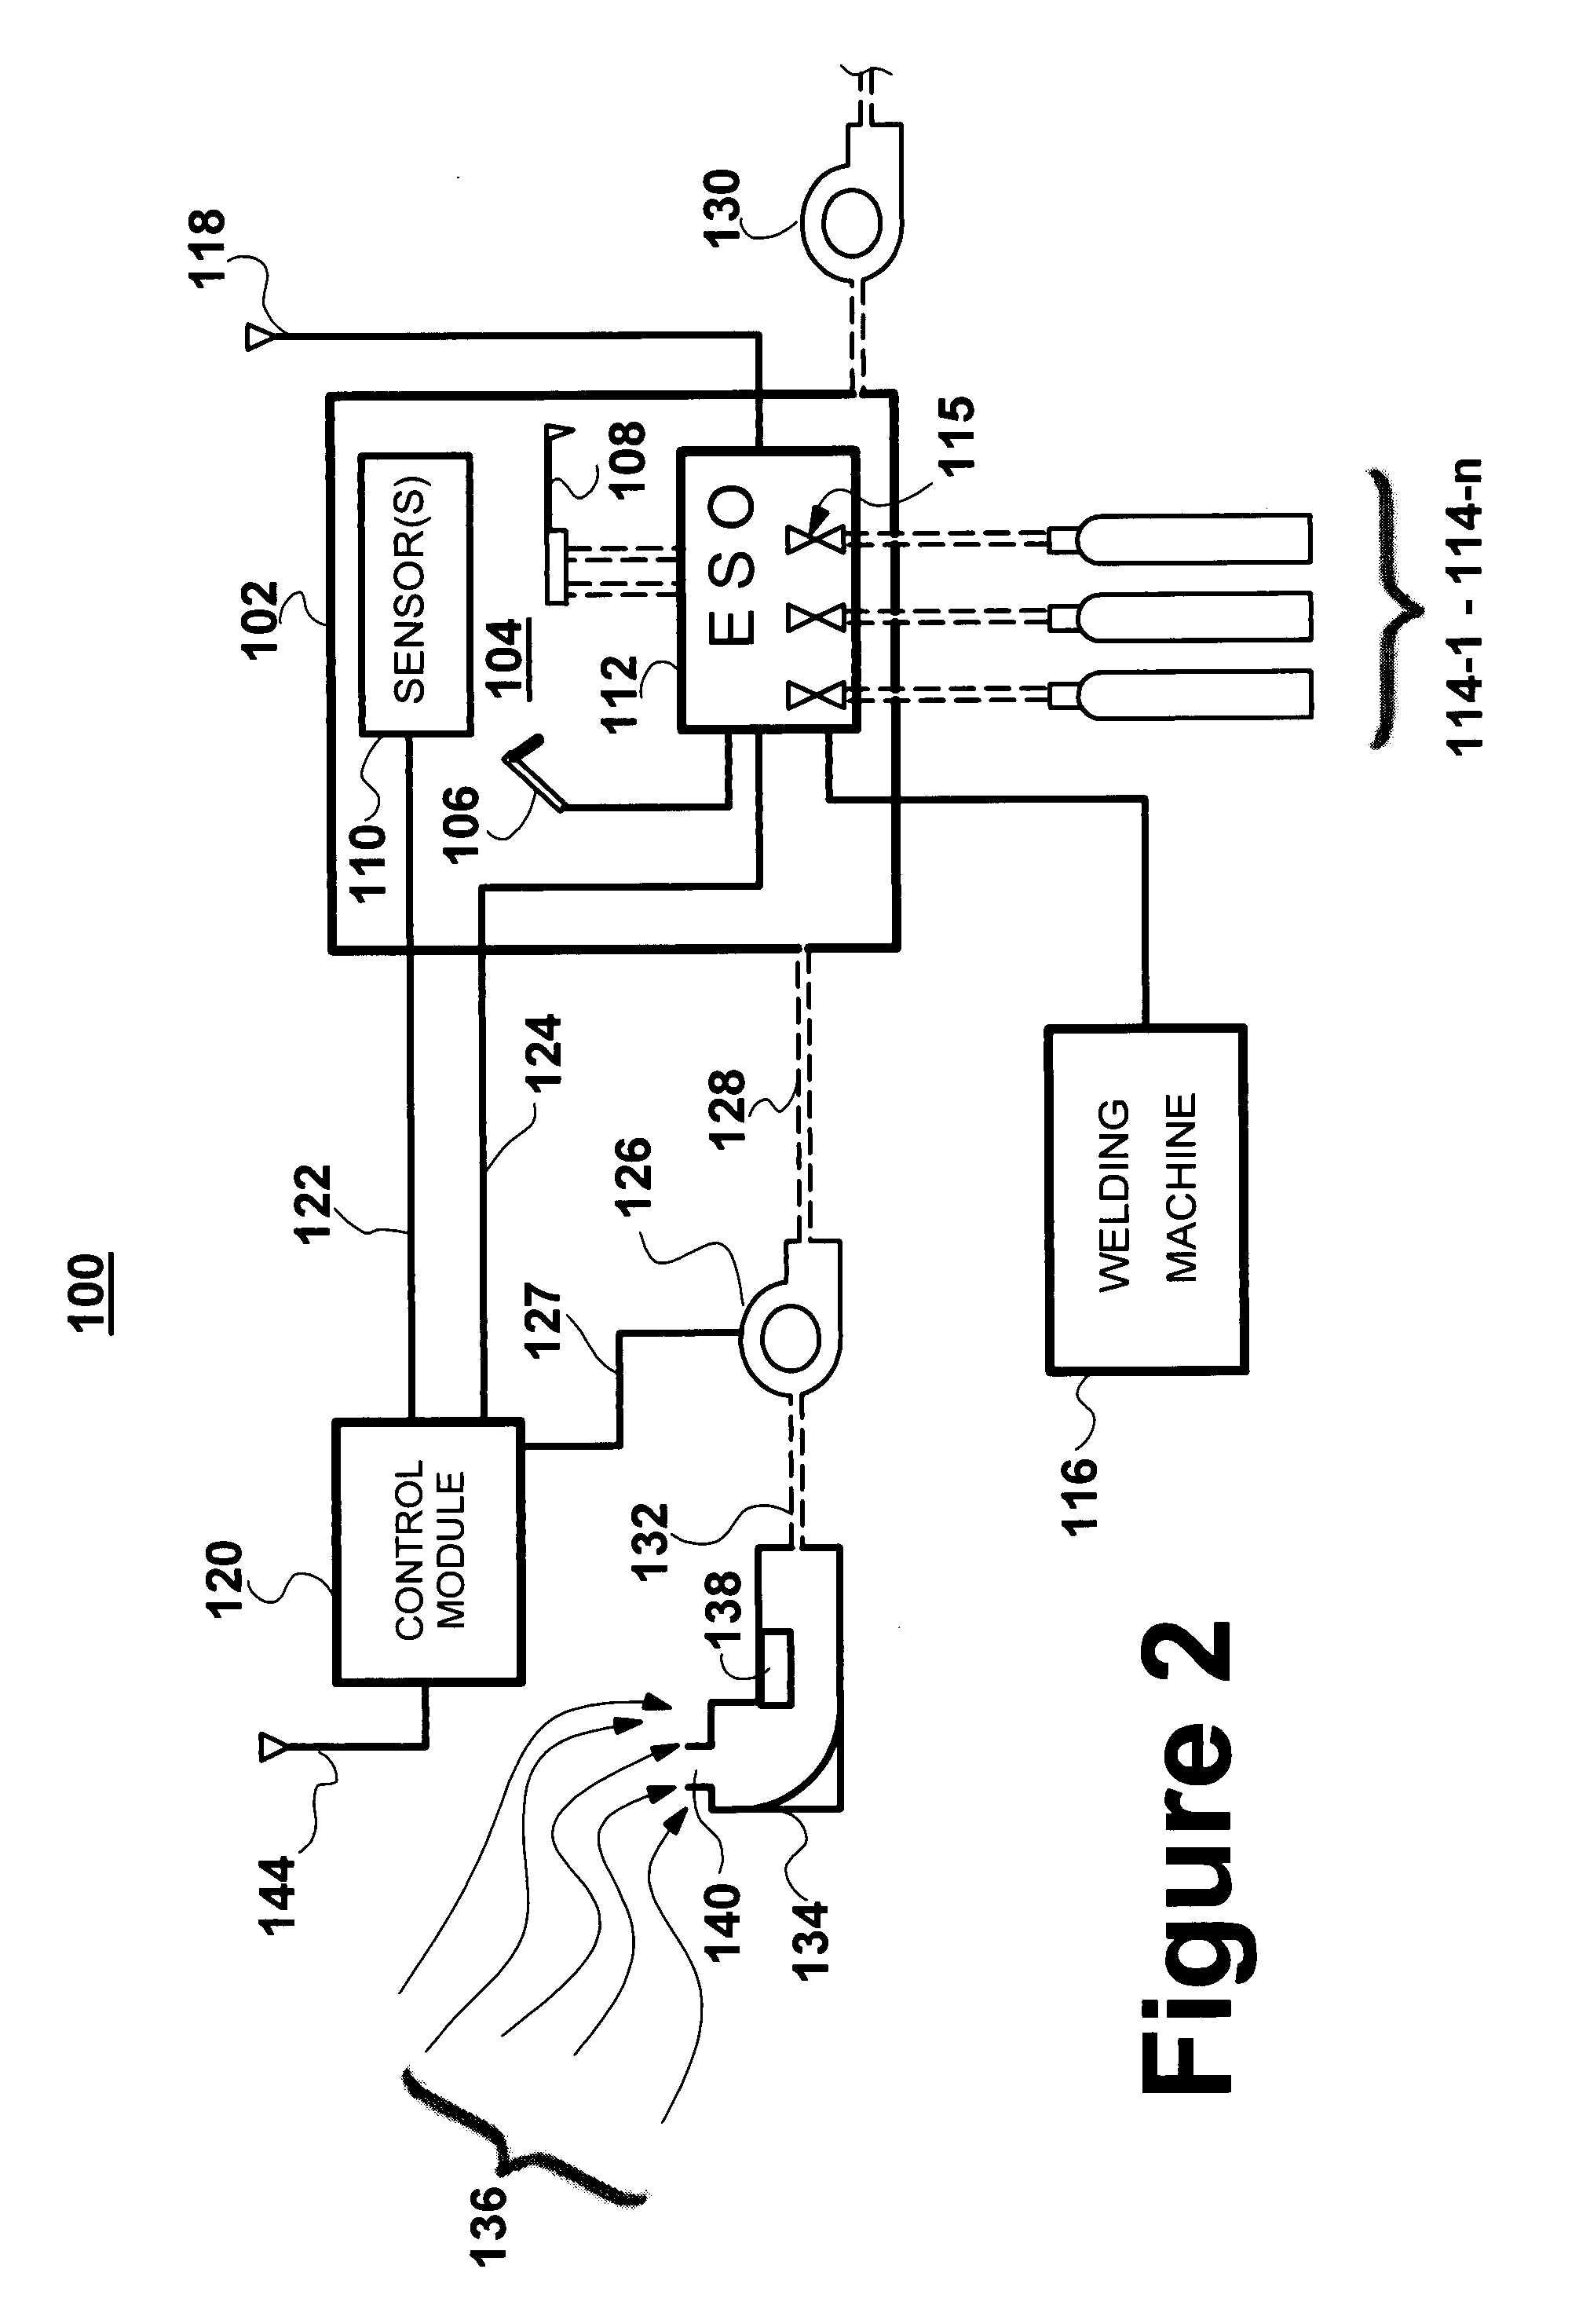 Workspace enclosure system with automatic shut-off